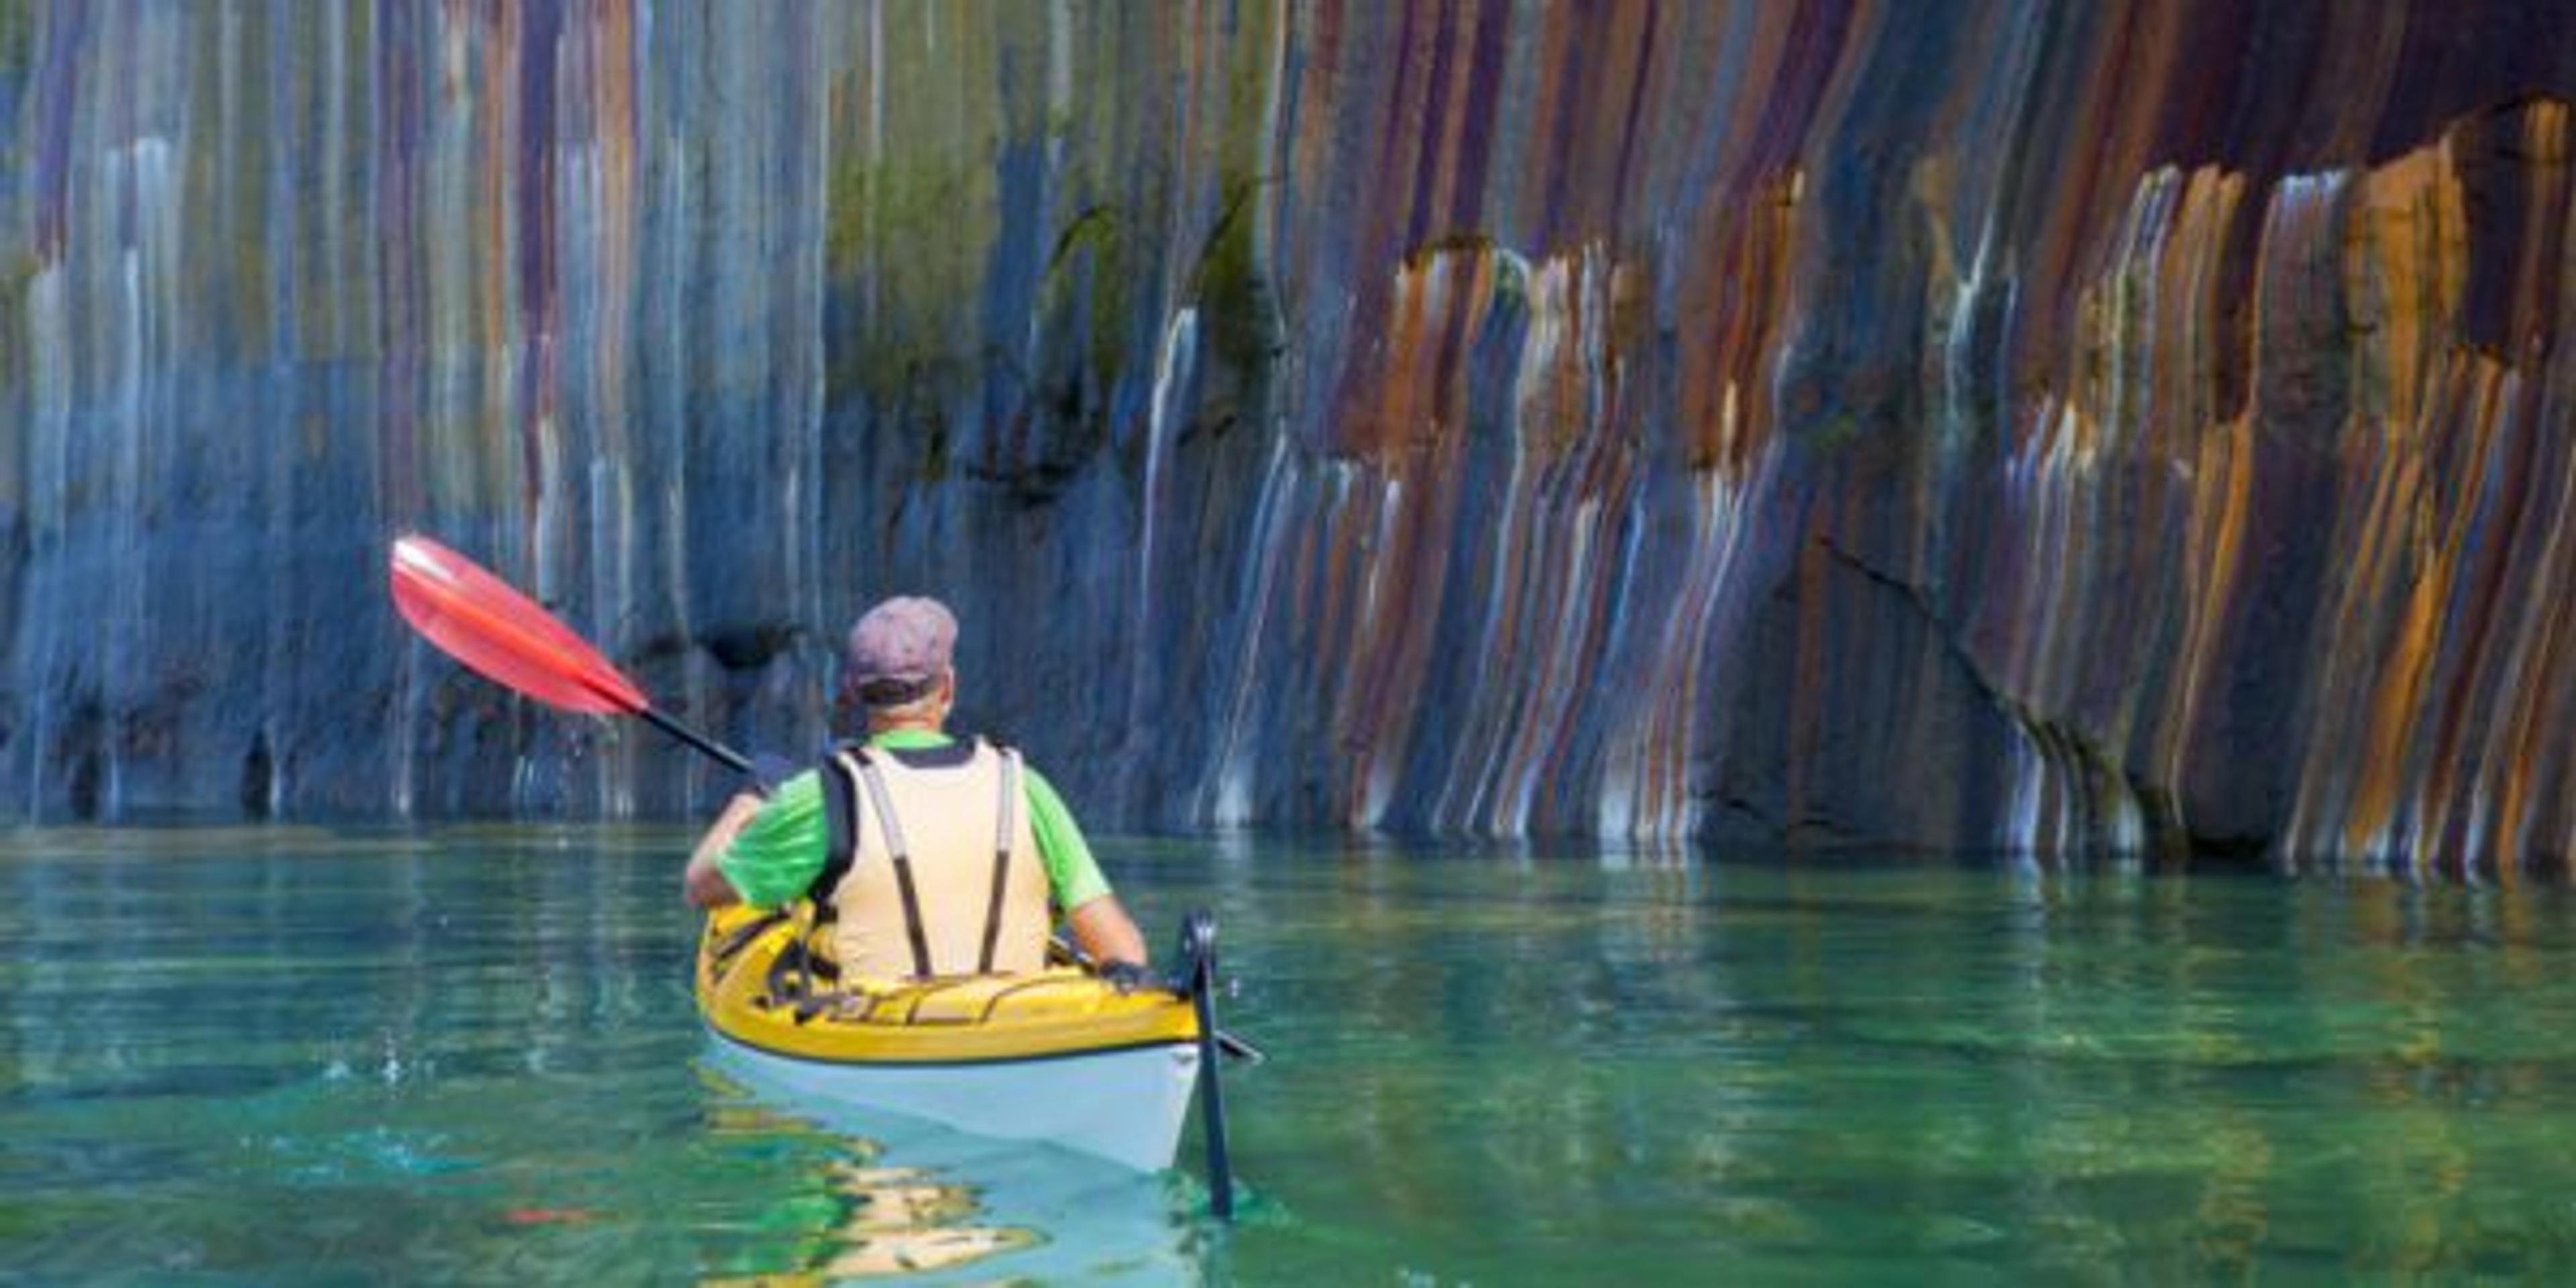 Sea kayaker viewing the multi-colored cliffs at the Pictured Rocks National Lakeshore on Lake Superior in Michigan’s Upper Peninsula